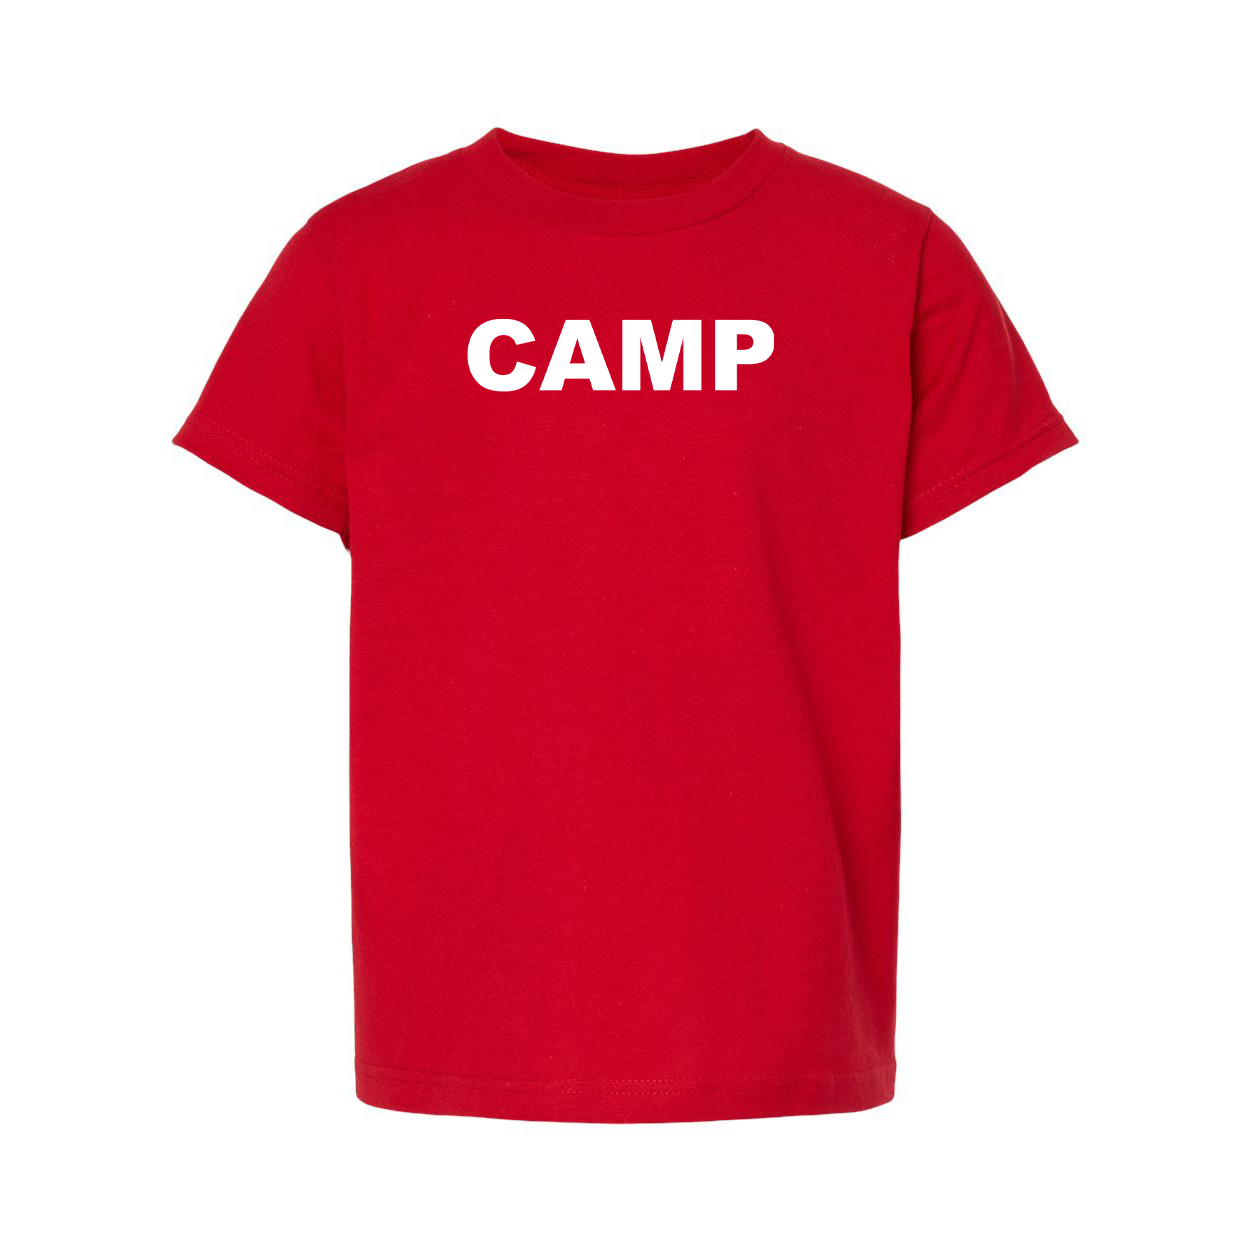 Camp Brand Logo Classic Youth Unisex T-Shirt Red 